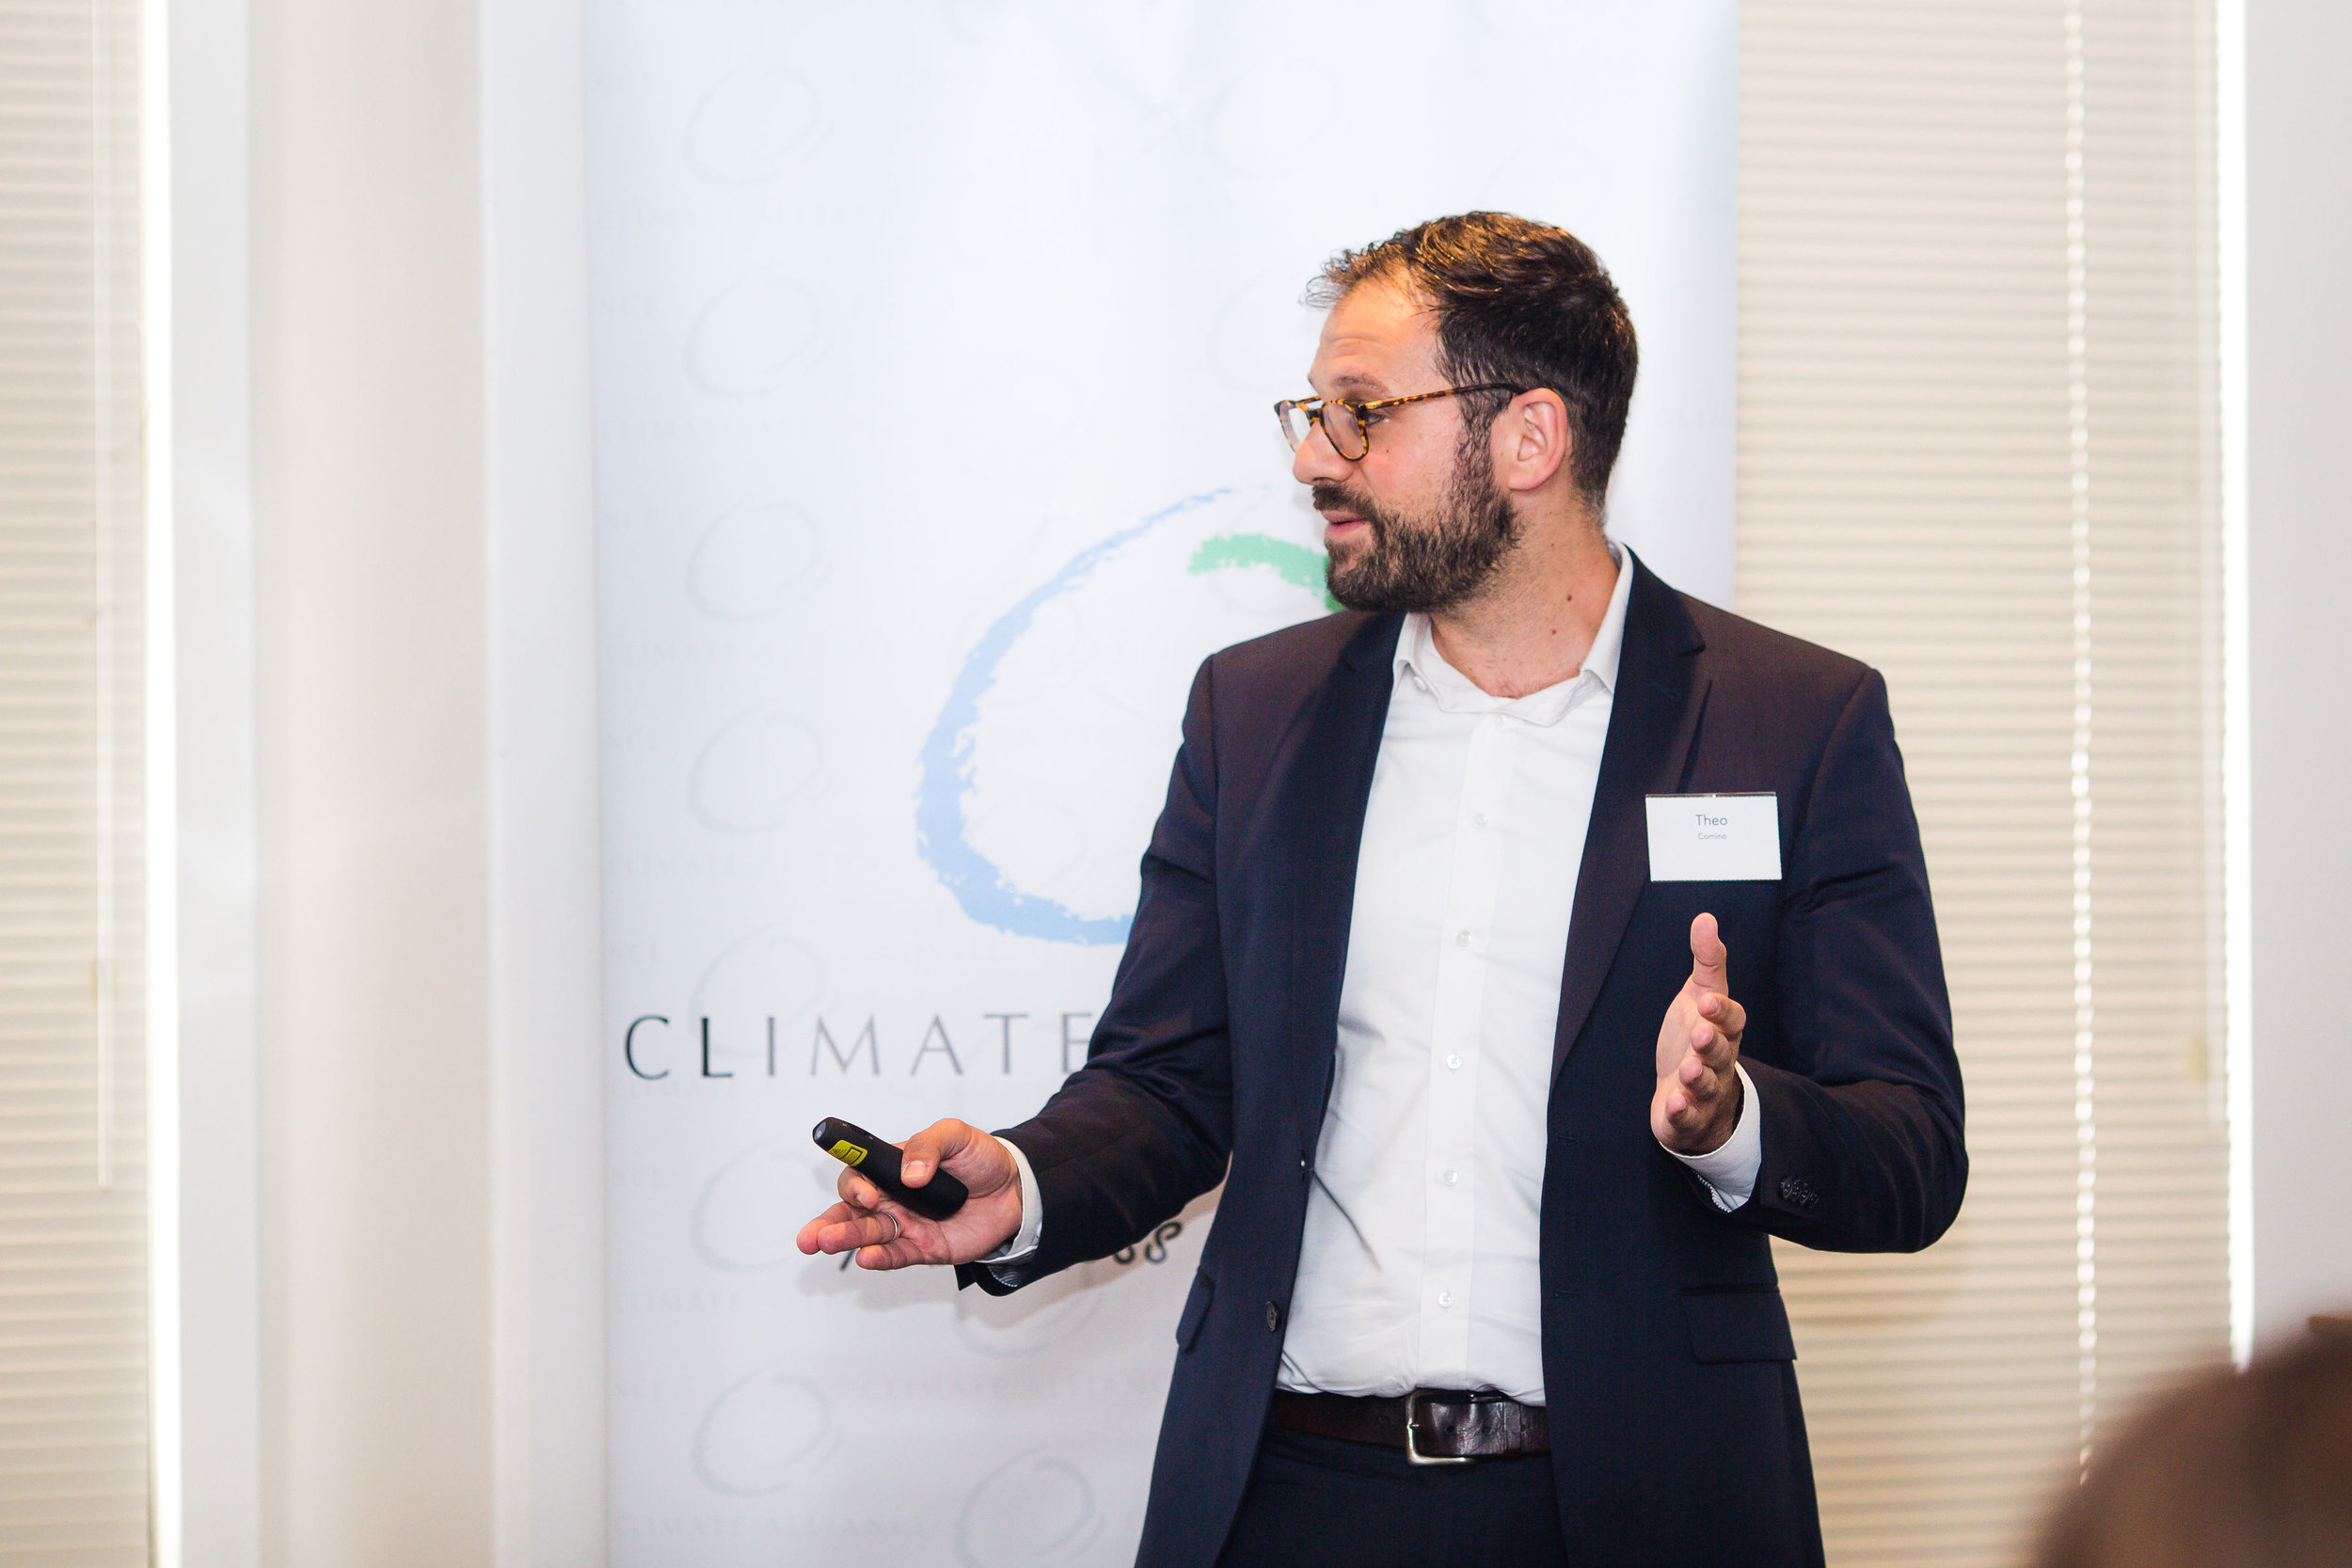  Theo Comino, Manager Greenhouse and Sustainability at AGL 